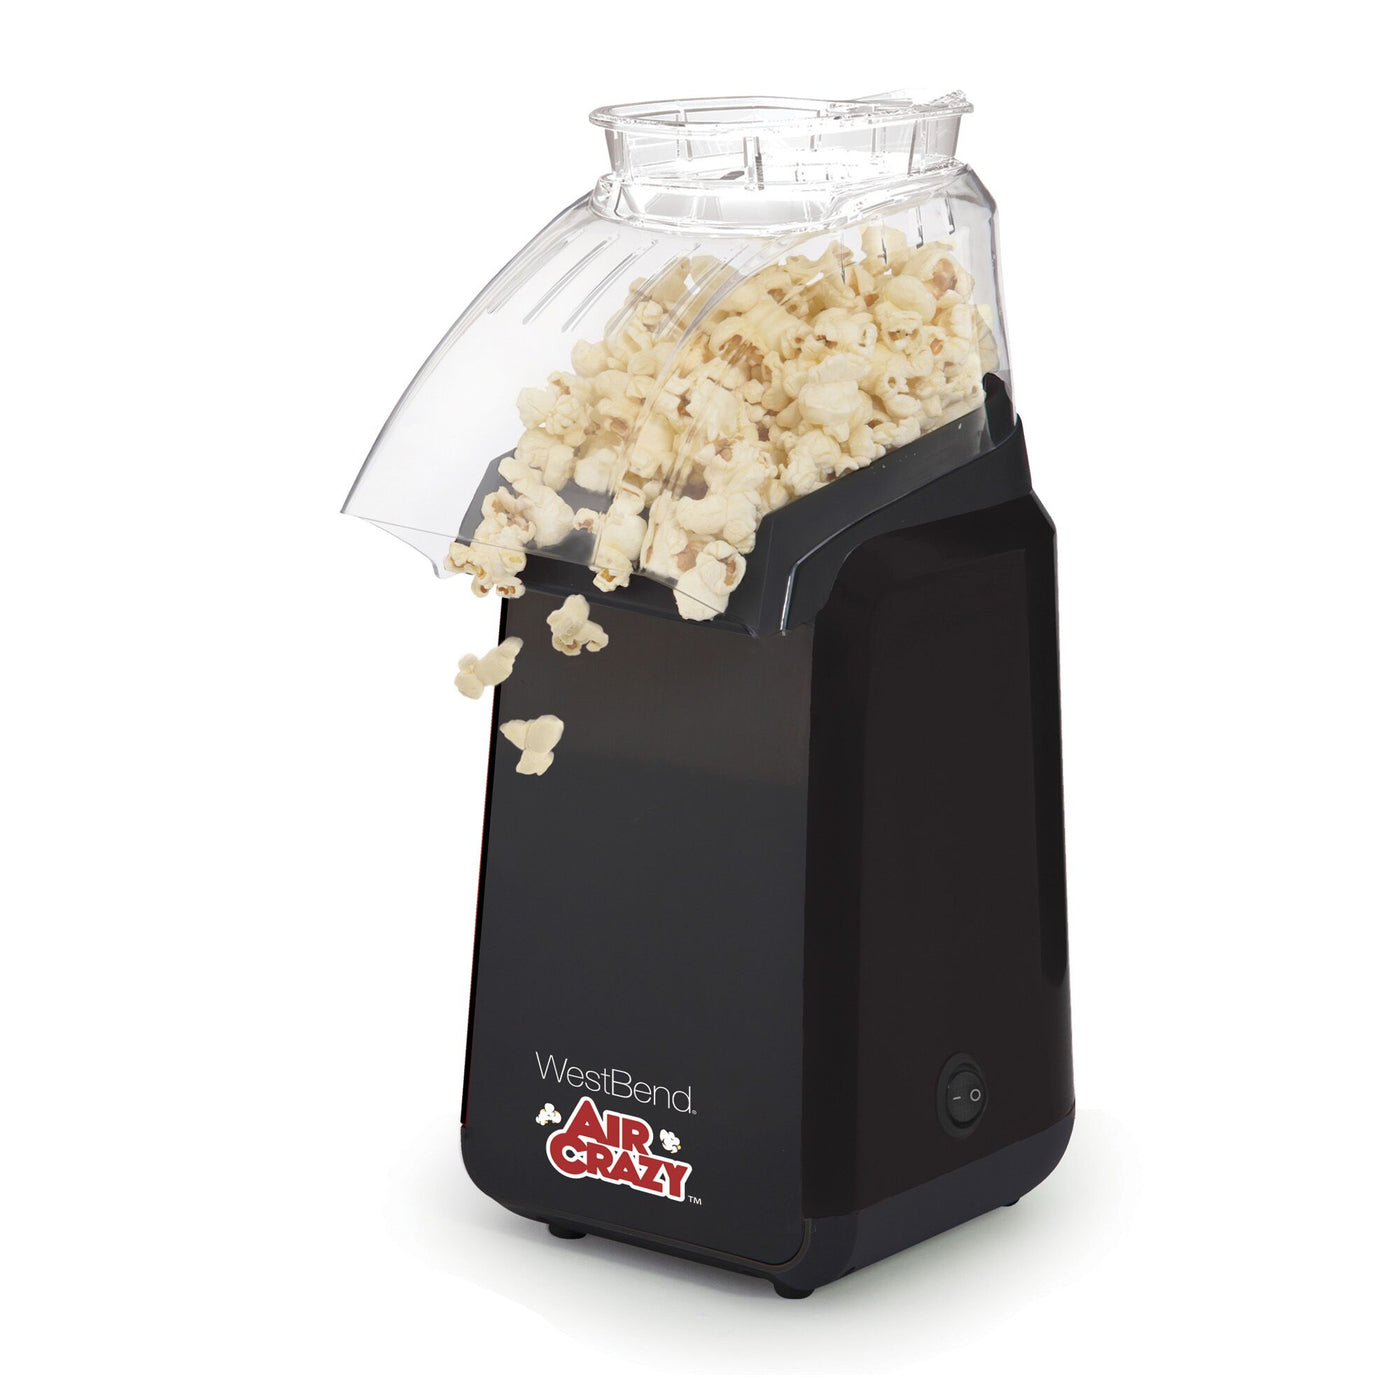 air popcorn poppers for home